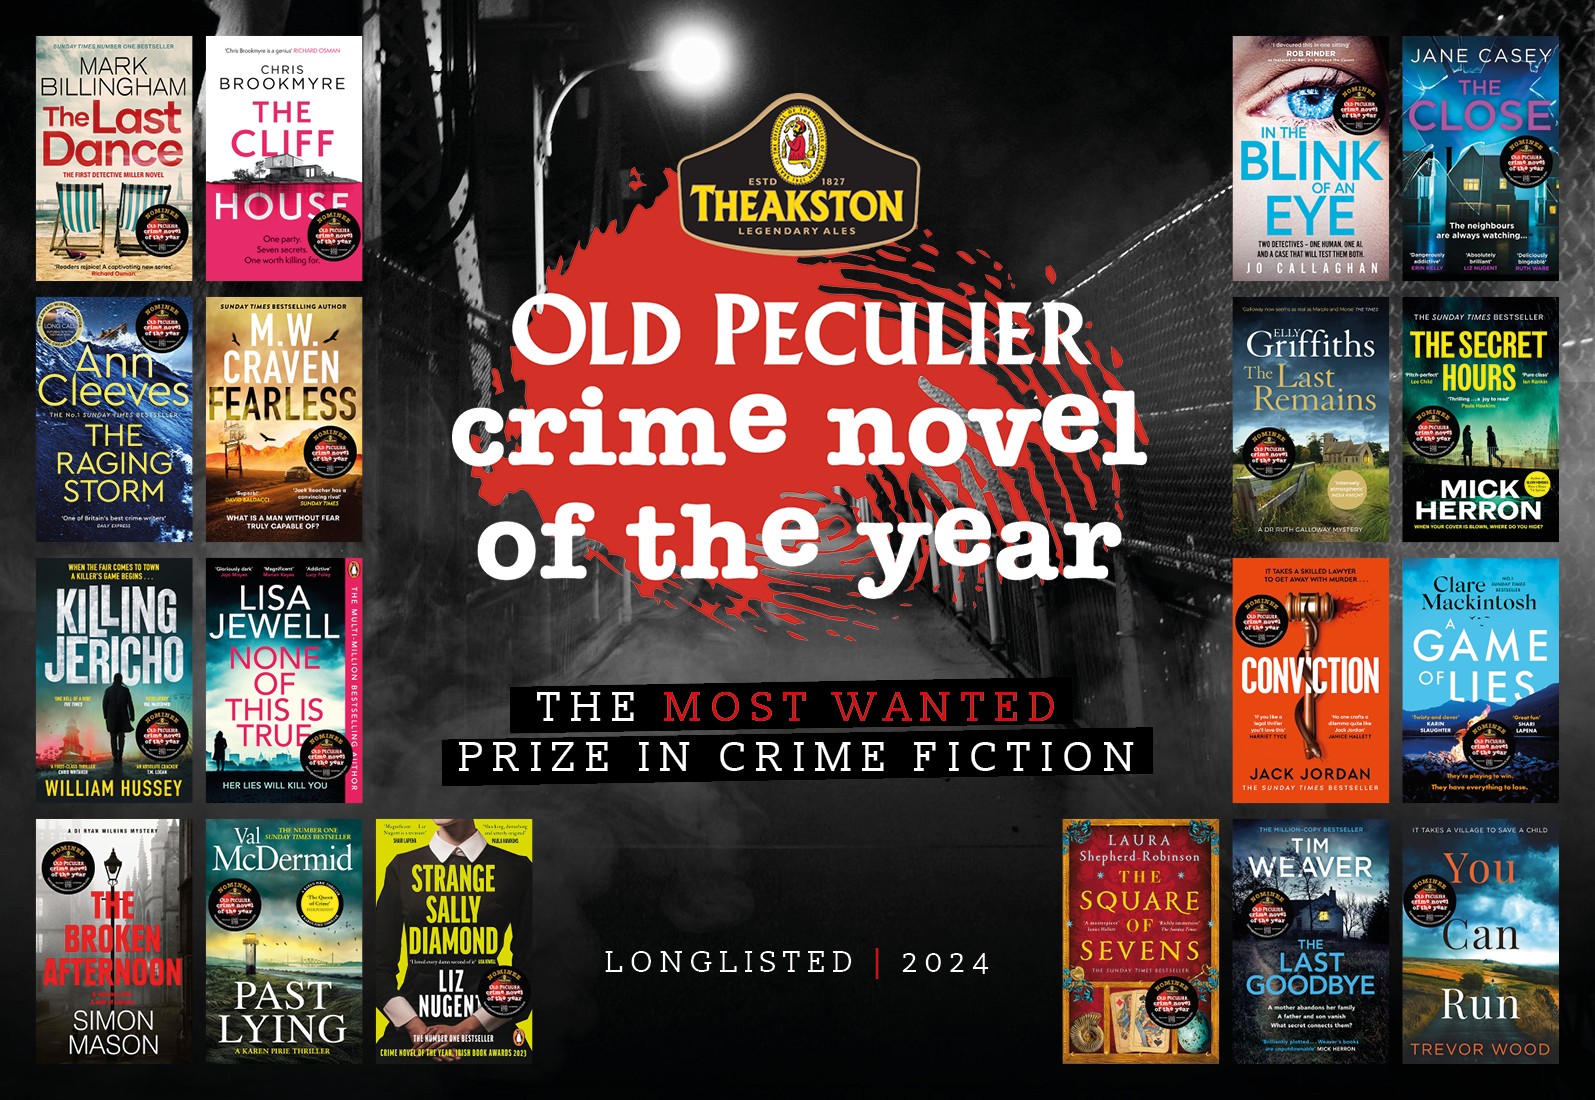 Harrogate International Festivals presents the Theakston Old Peculier Crime Novel of the Year Longlist